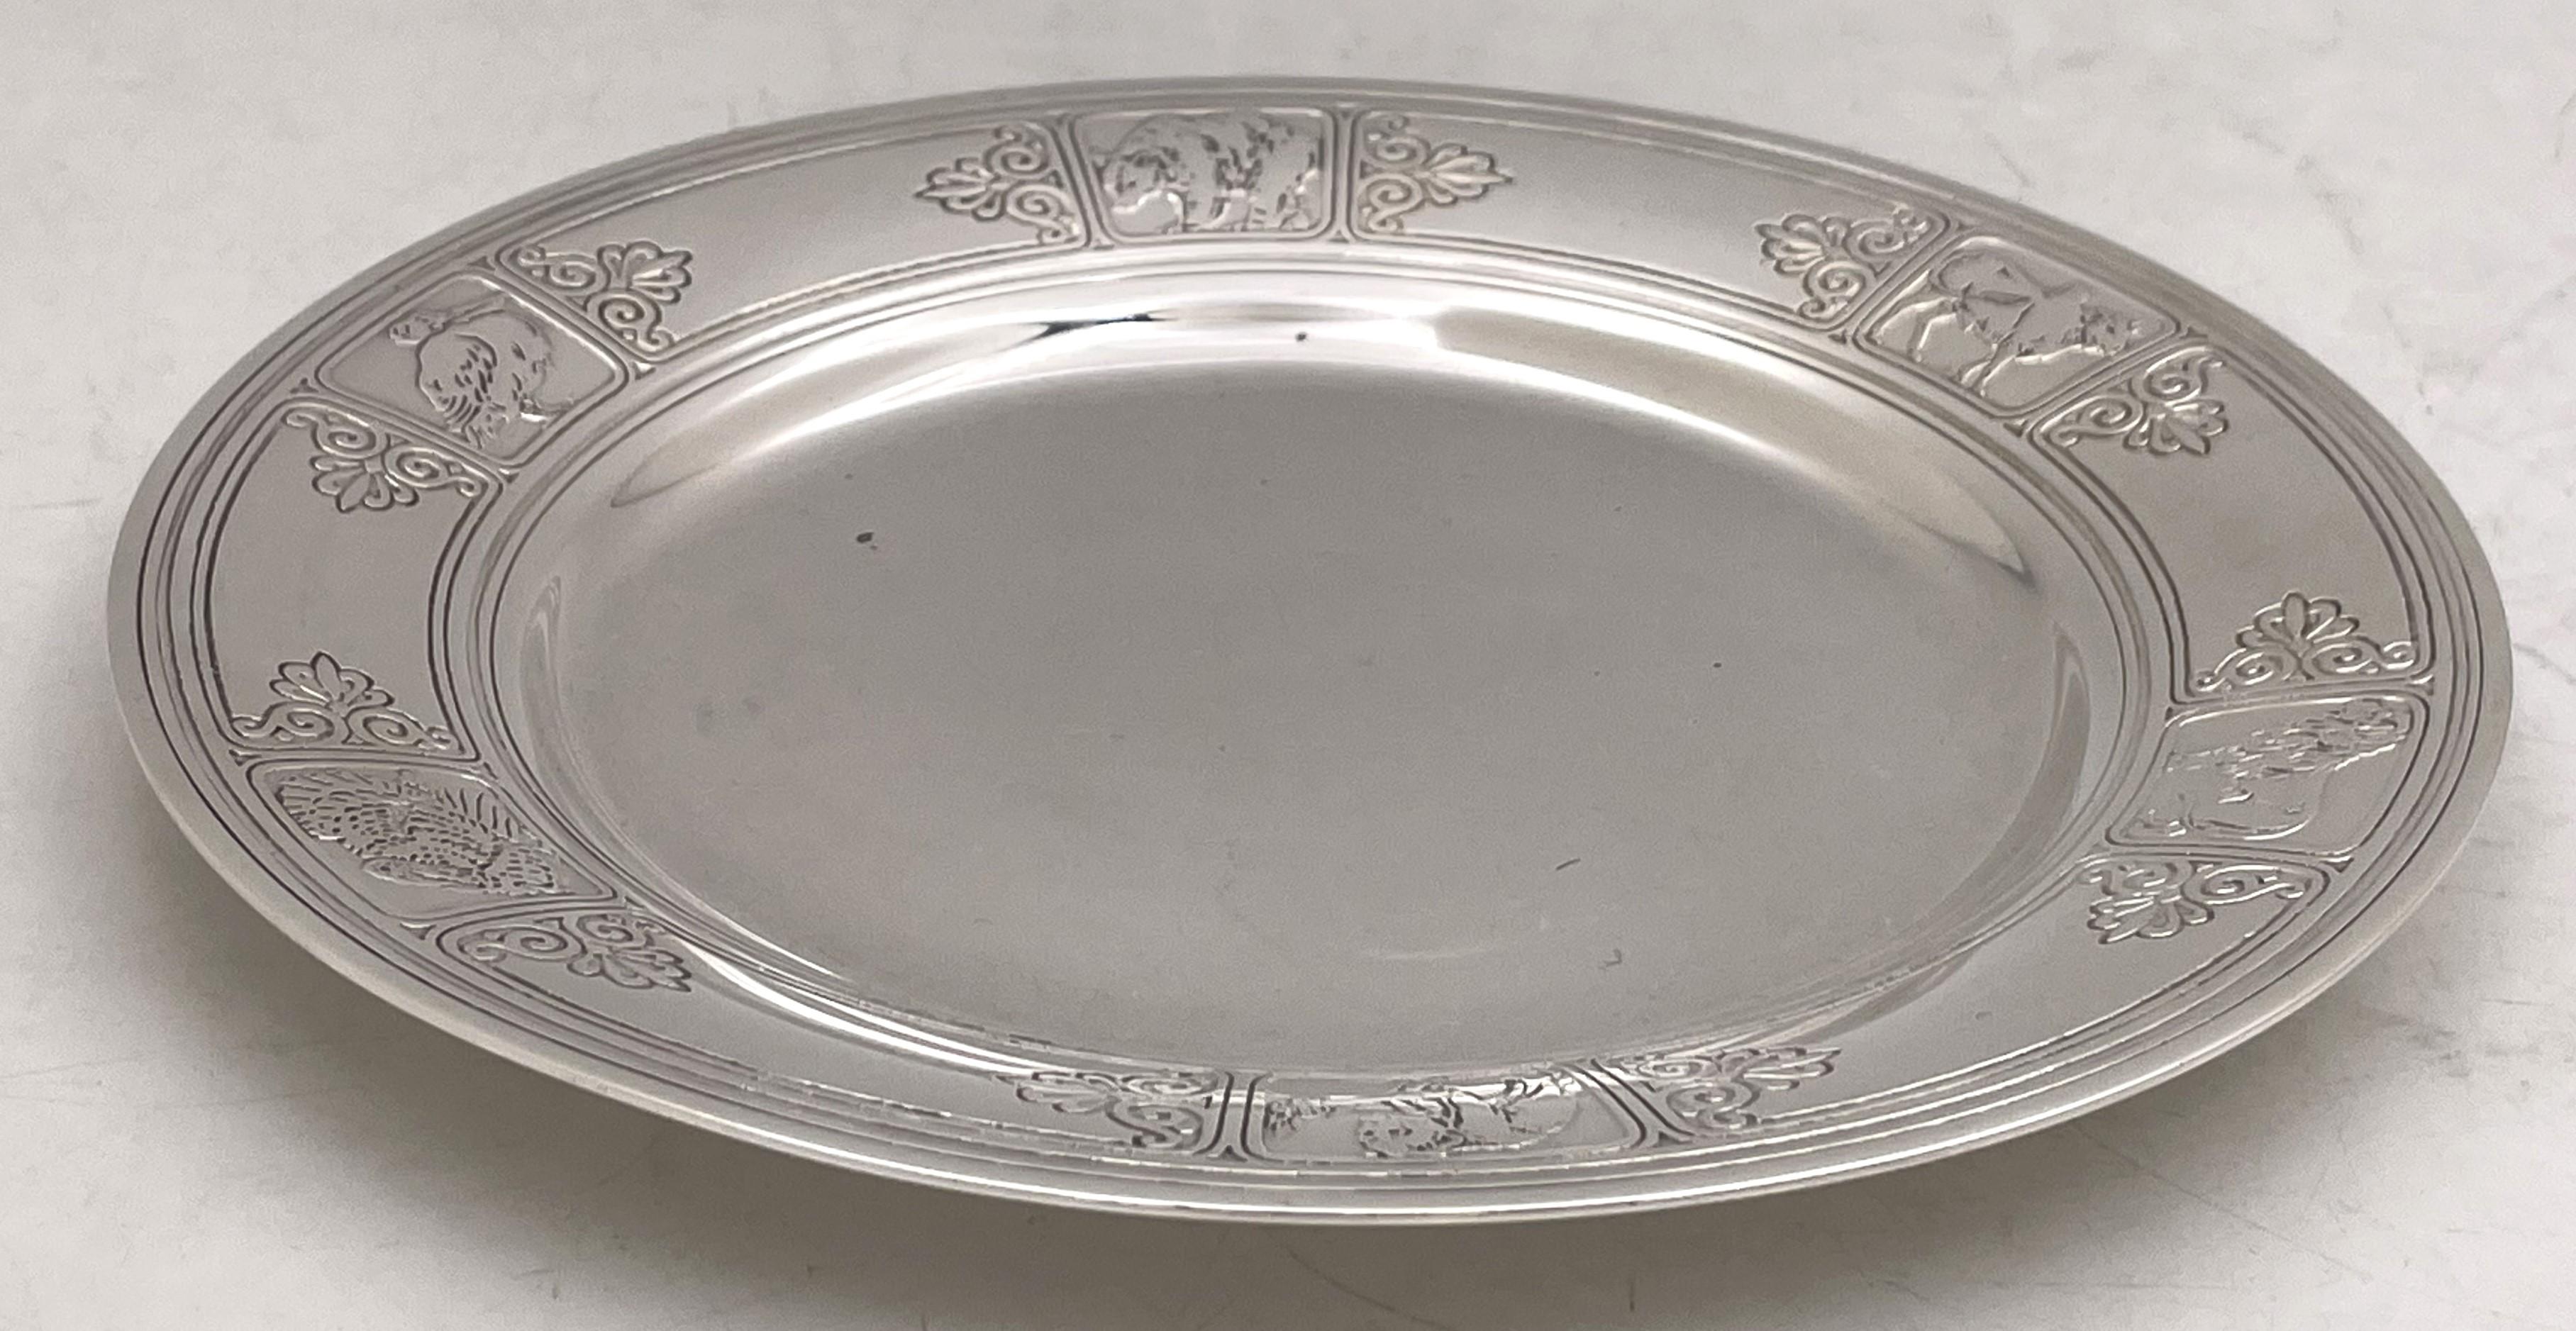 Tiffany & Co. Sterling Silver 1927 Child's Plate / Dish with Animal Motifs For Sale 1